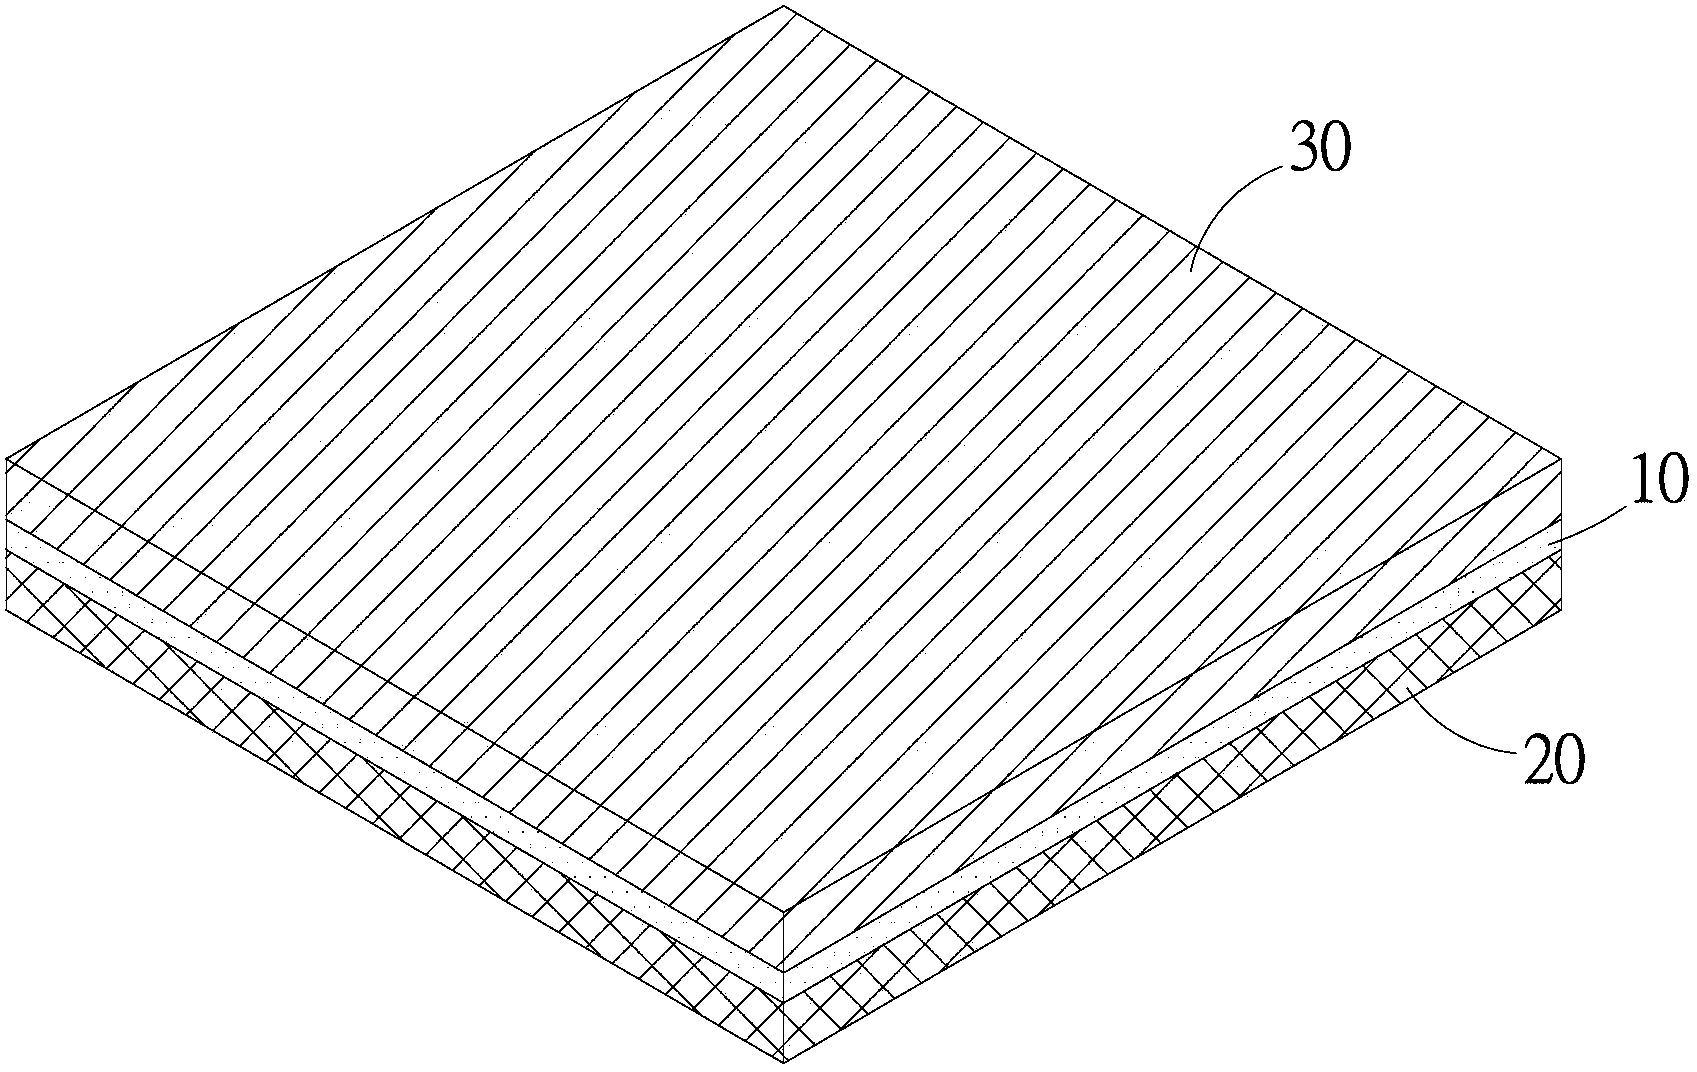 Base material-free optical adhesive tape and its manufacturing method